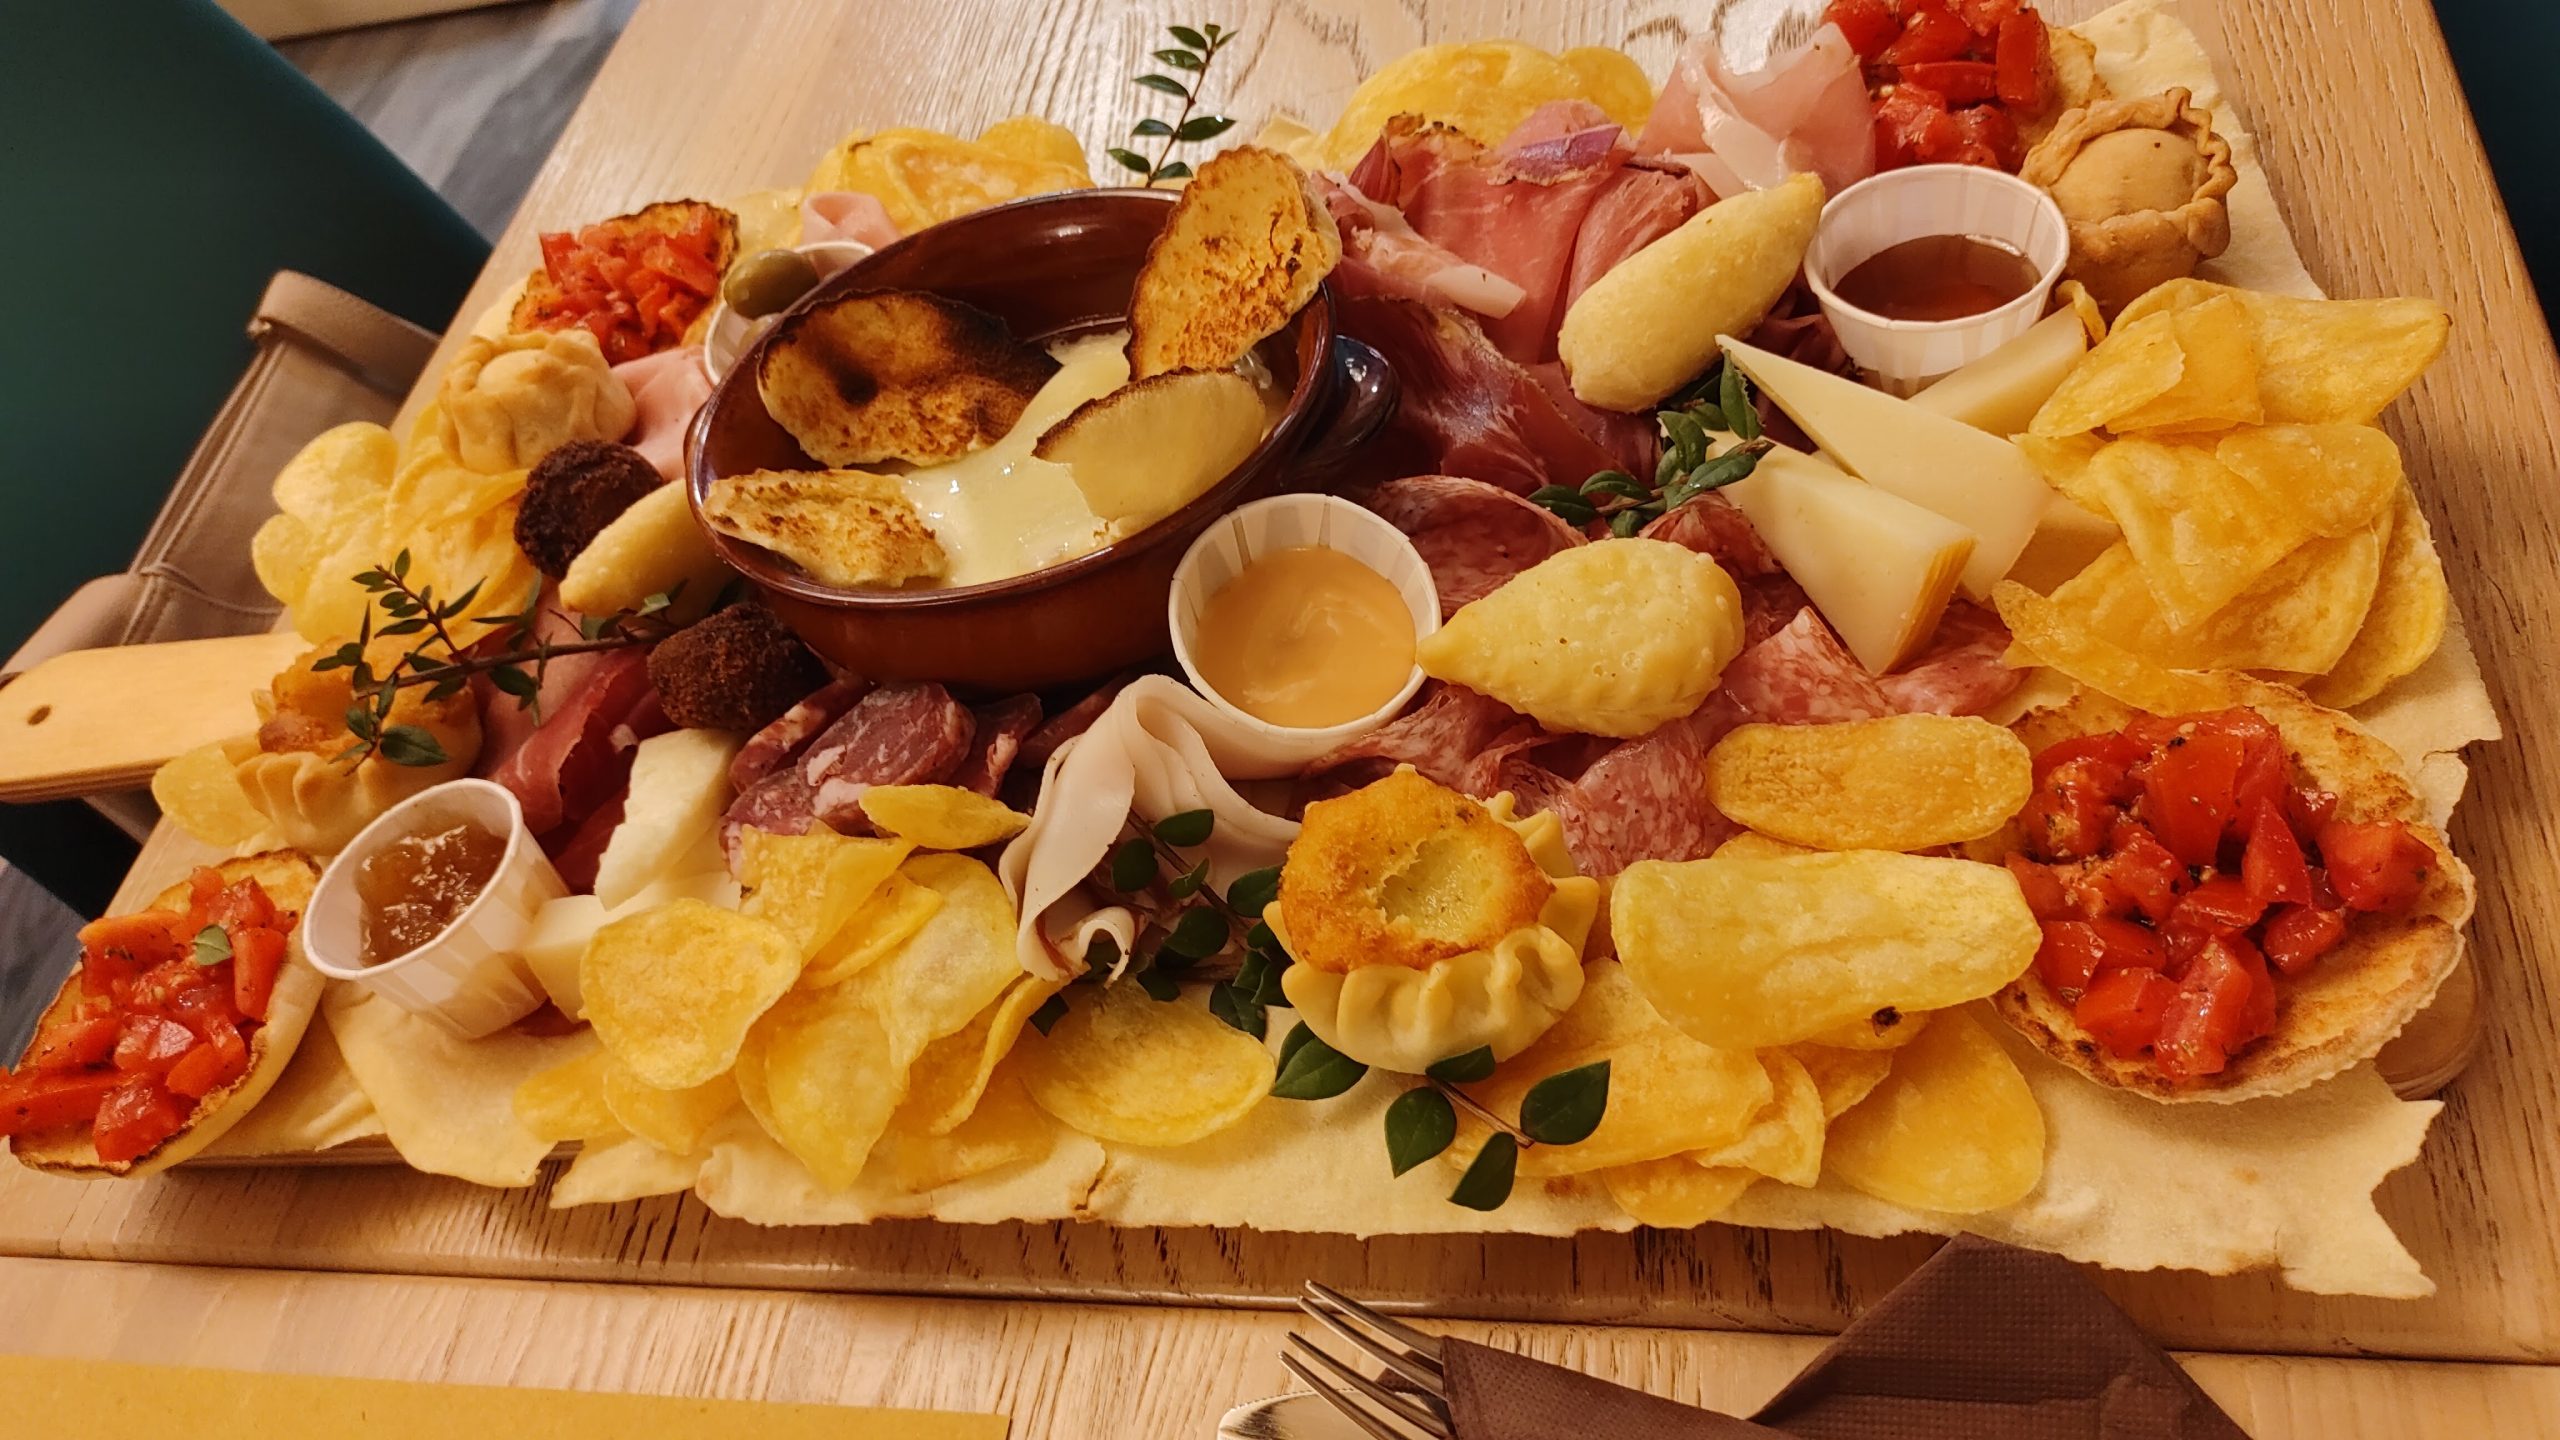 Ridiculously large Charcuterie Platter